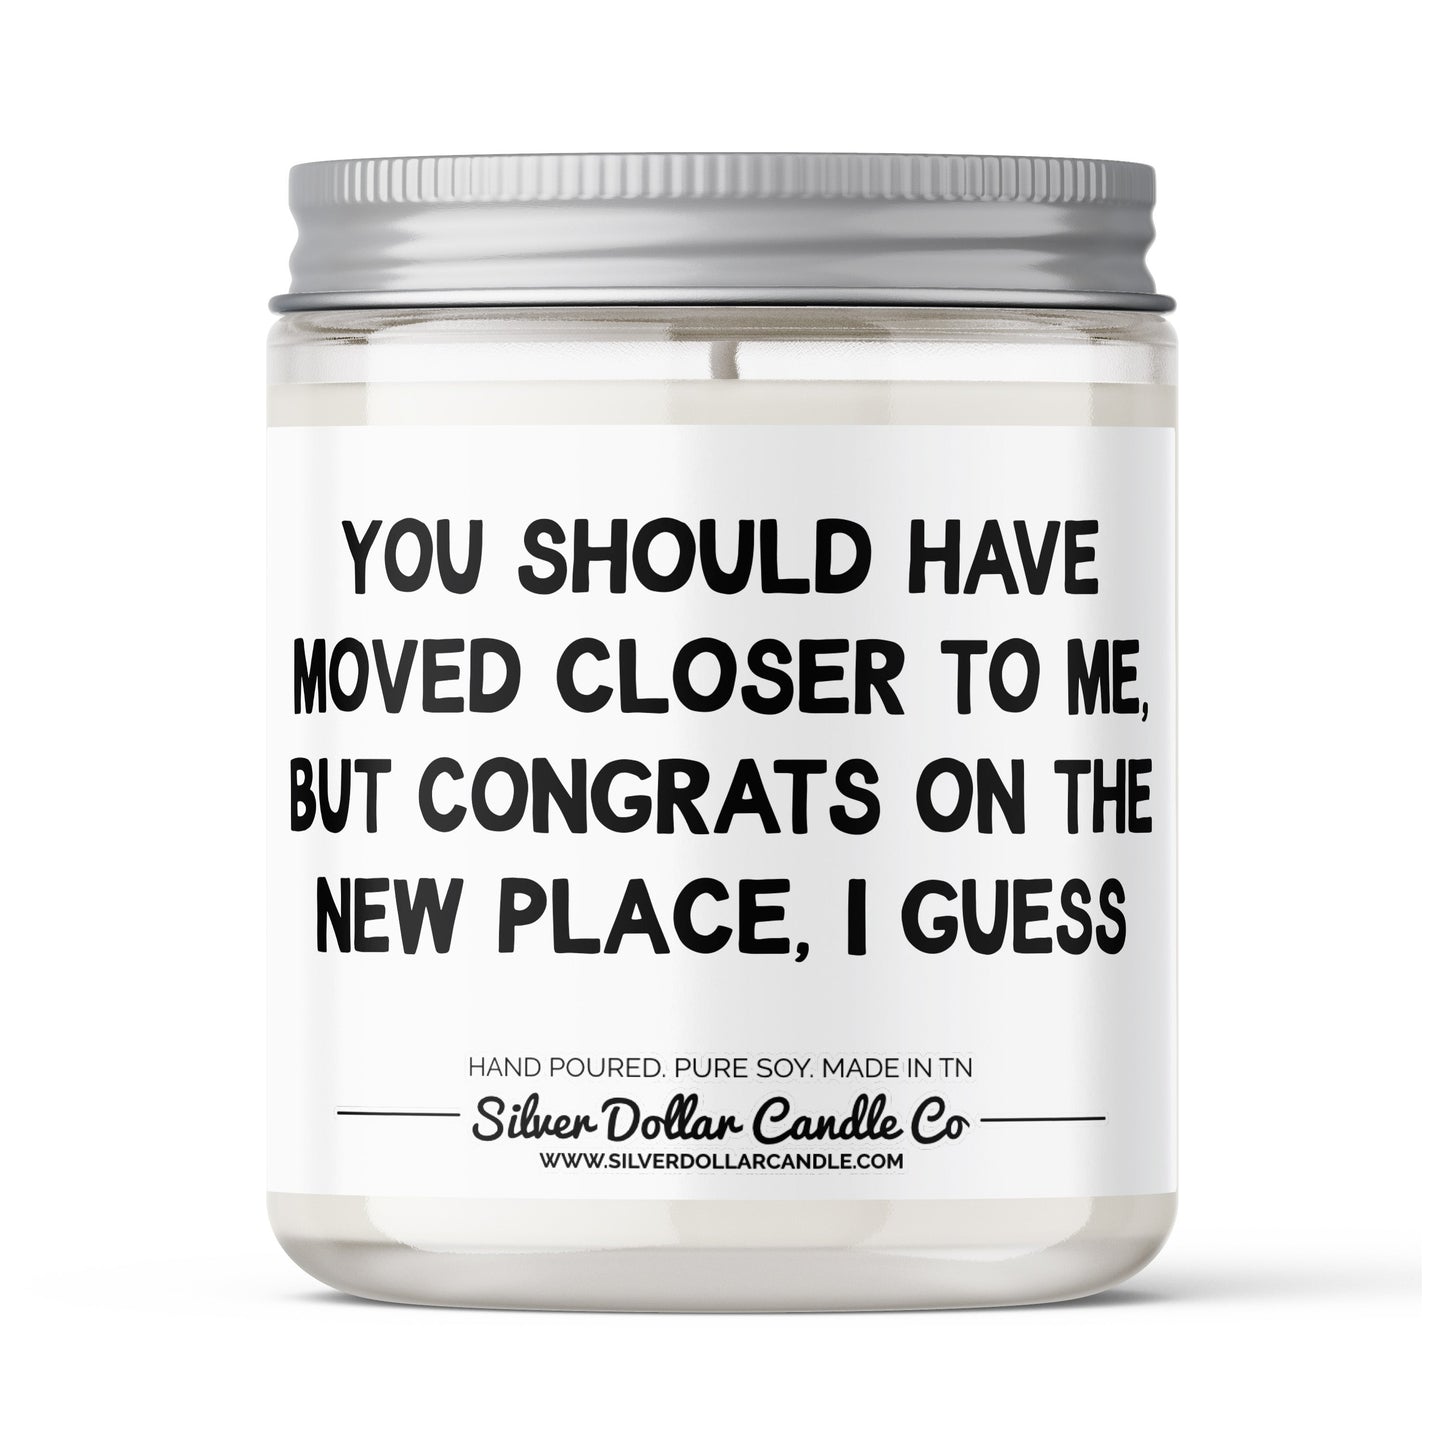 Should Have Moved Closer To Me Candle Gift - Funny Moving Candle -